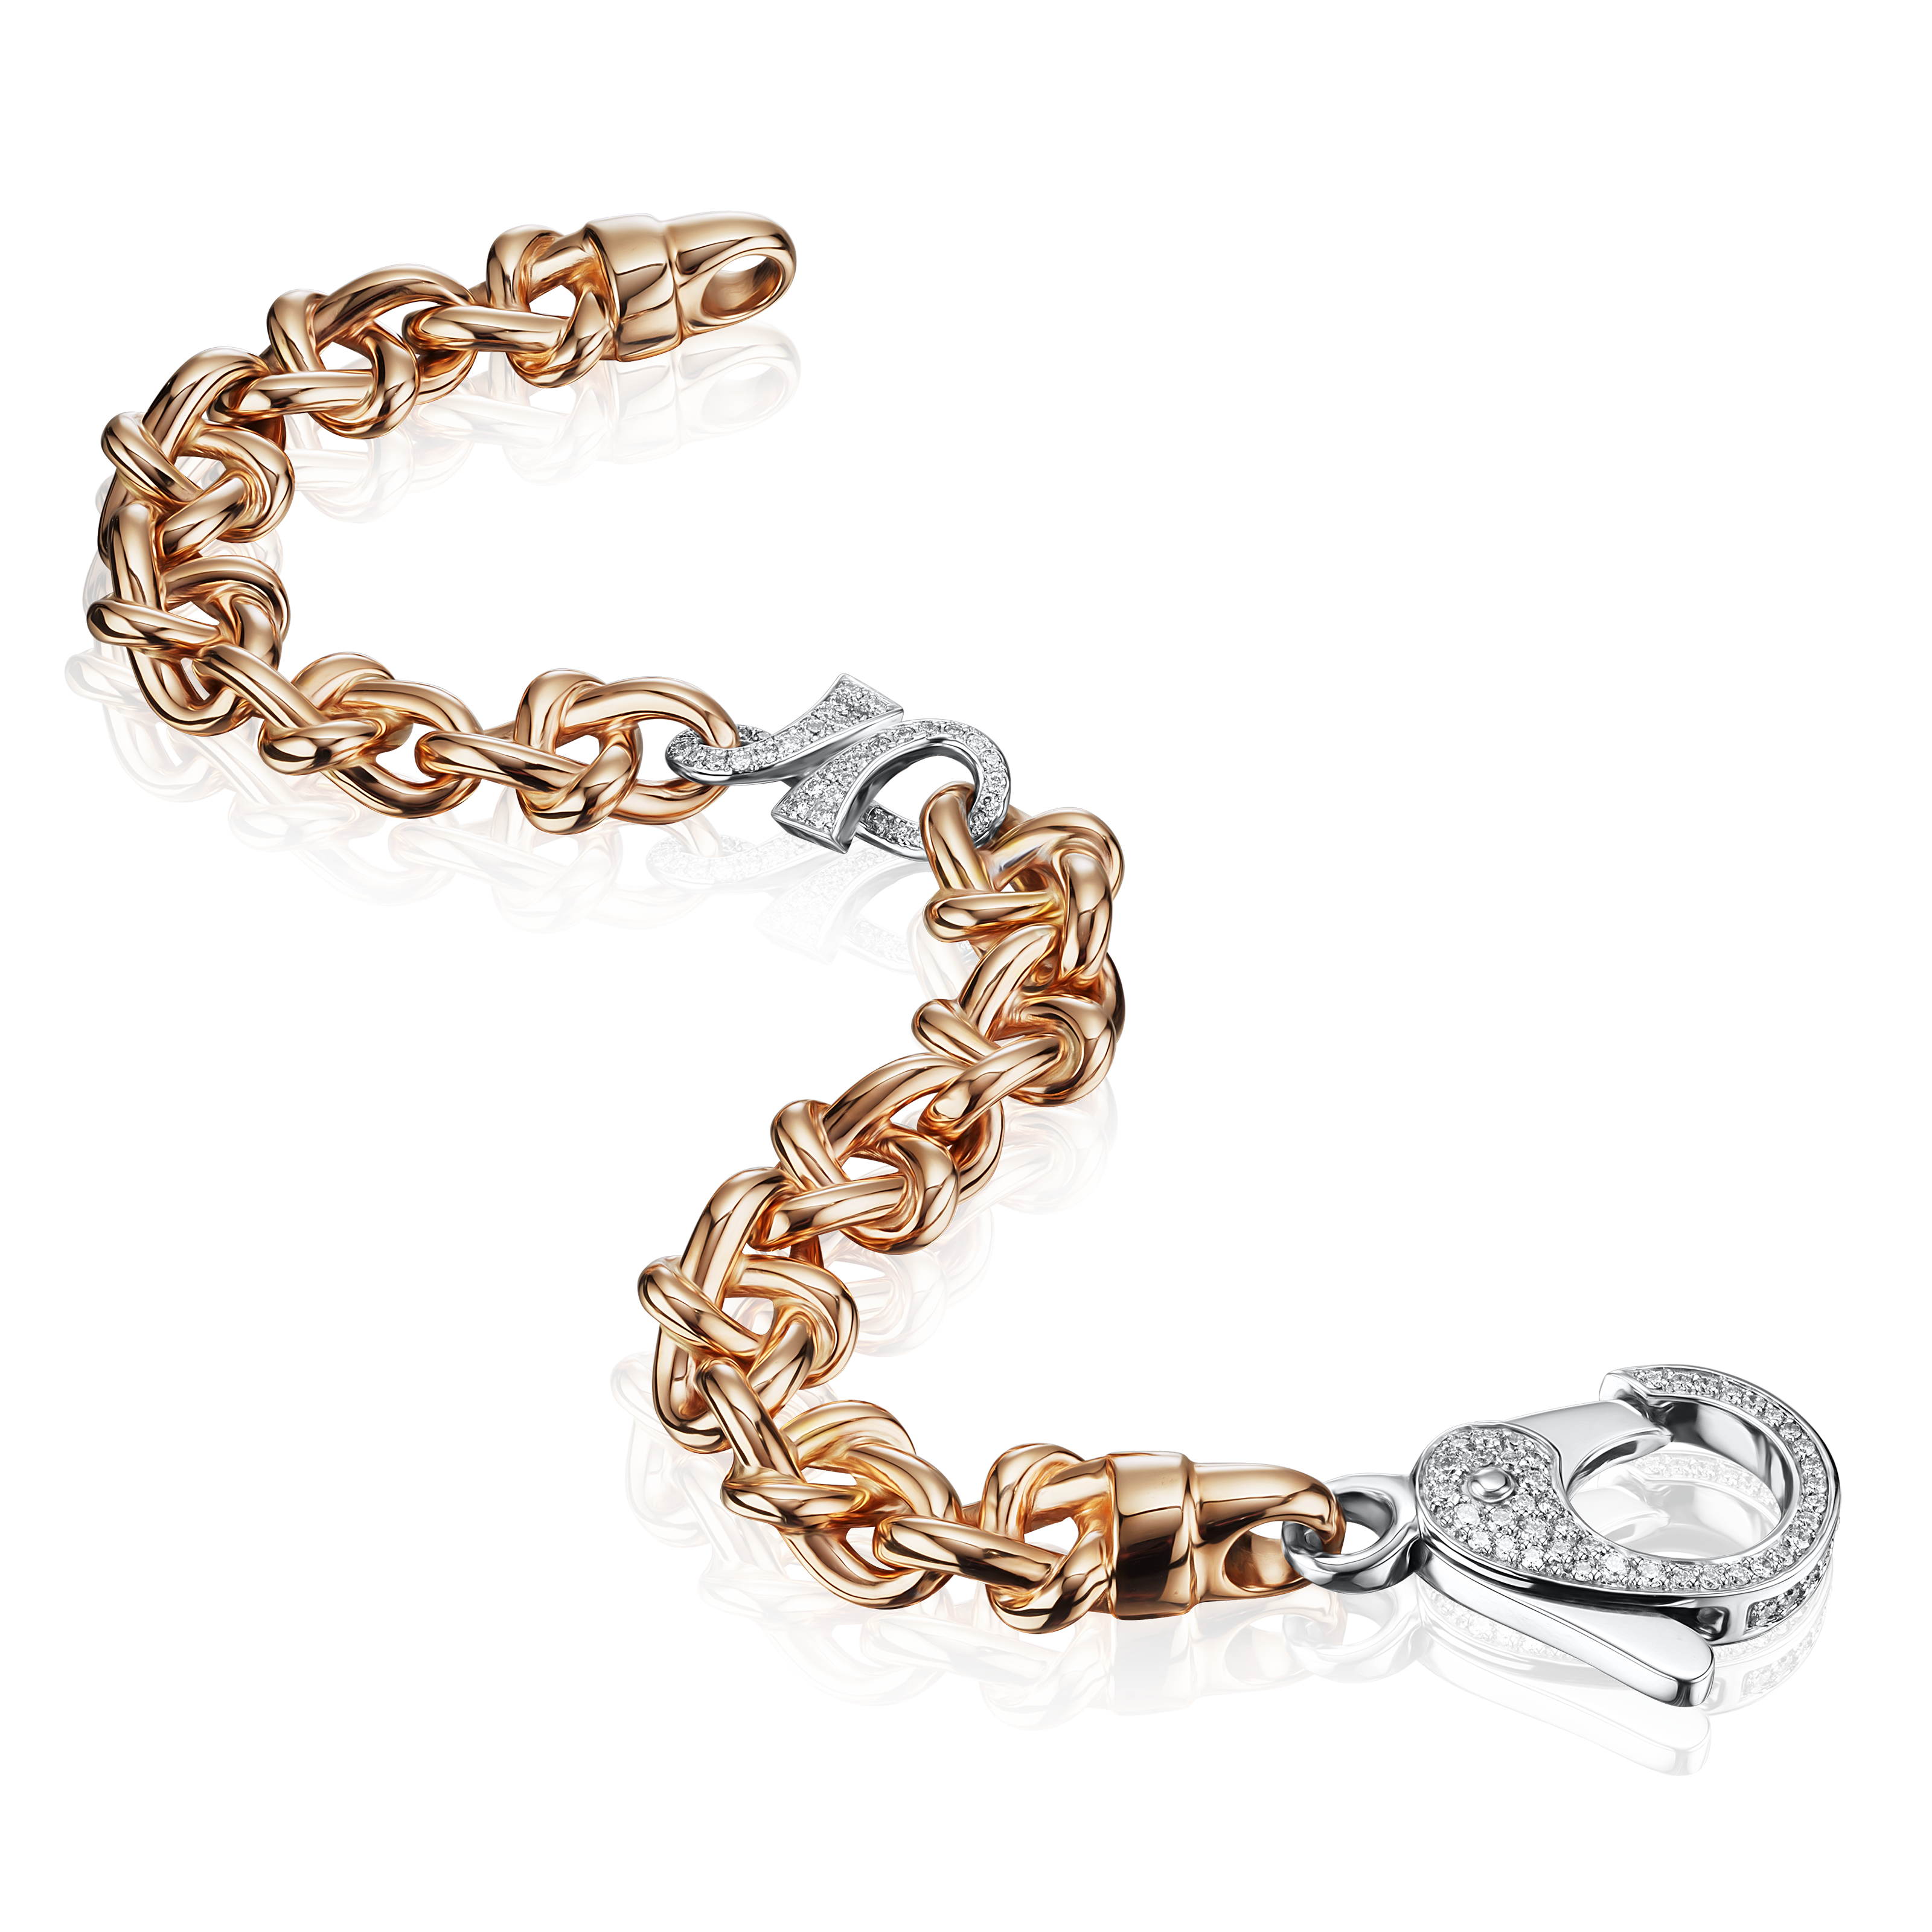 18ct Rose Gold Bracelet With Diamond Set Infinity Link and Clasp